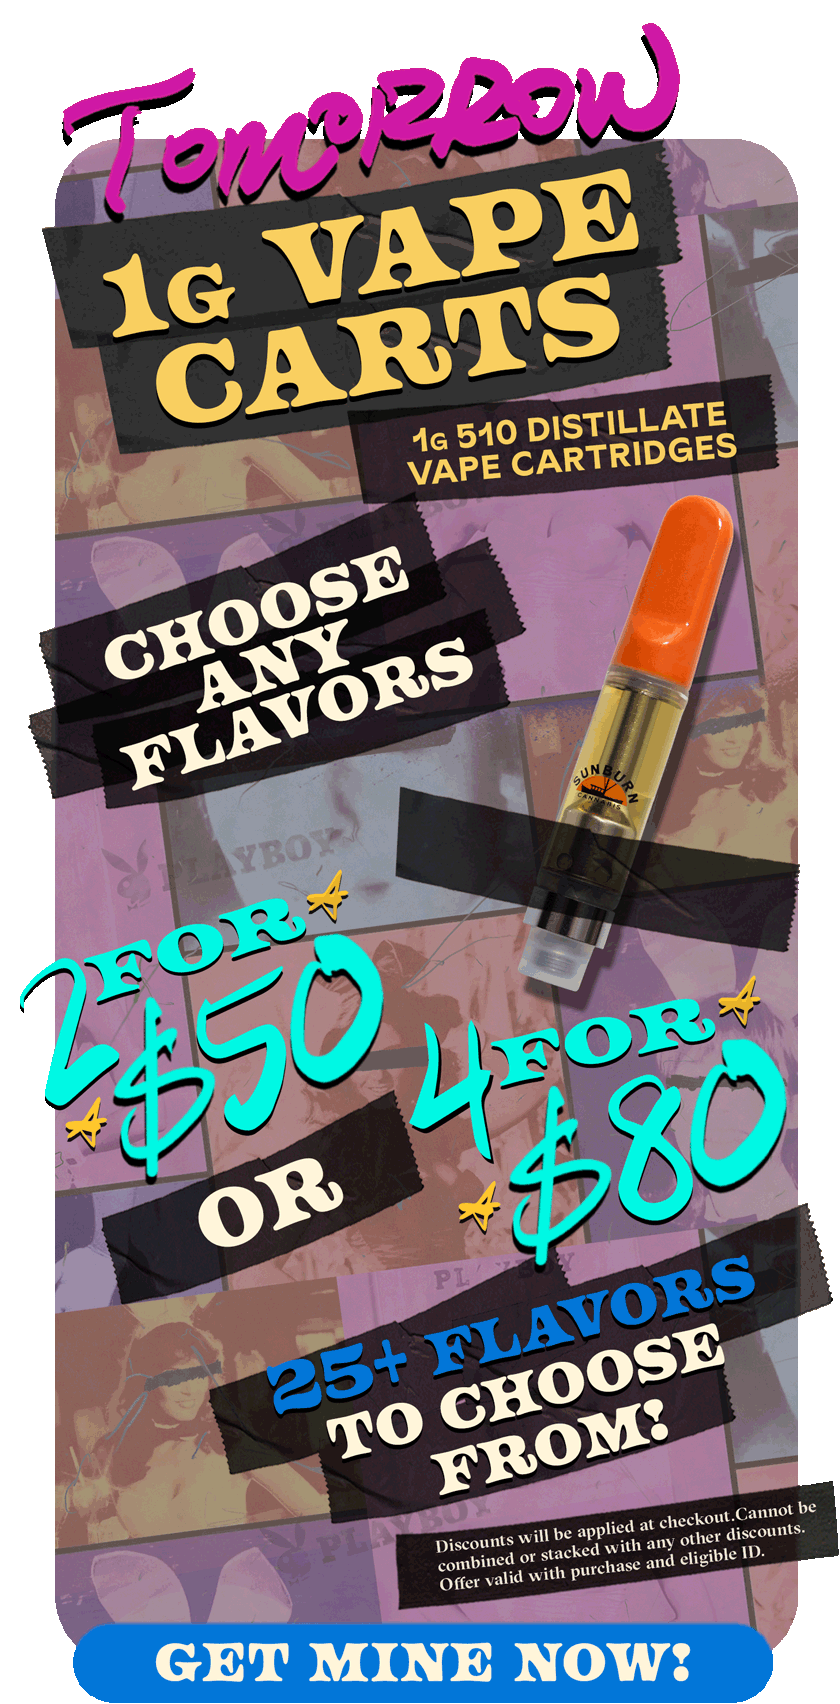 1G Vape Carts 2 for$50 4for$80 Easter Tomorrow